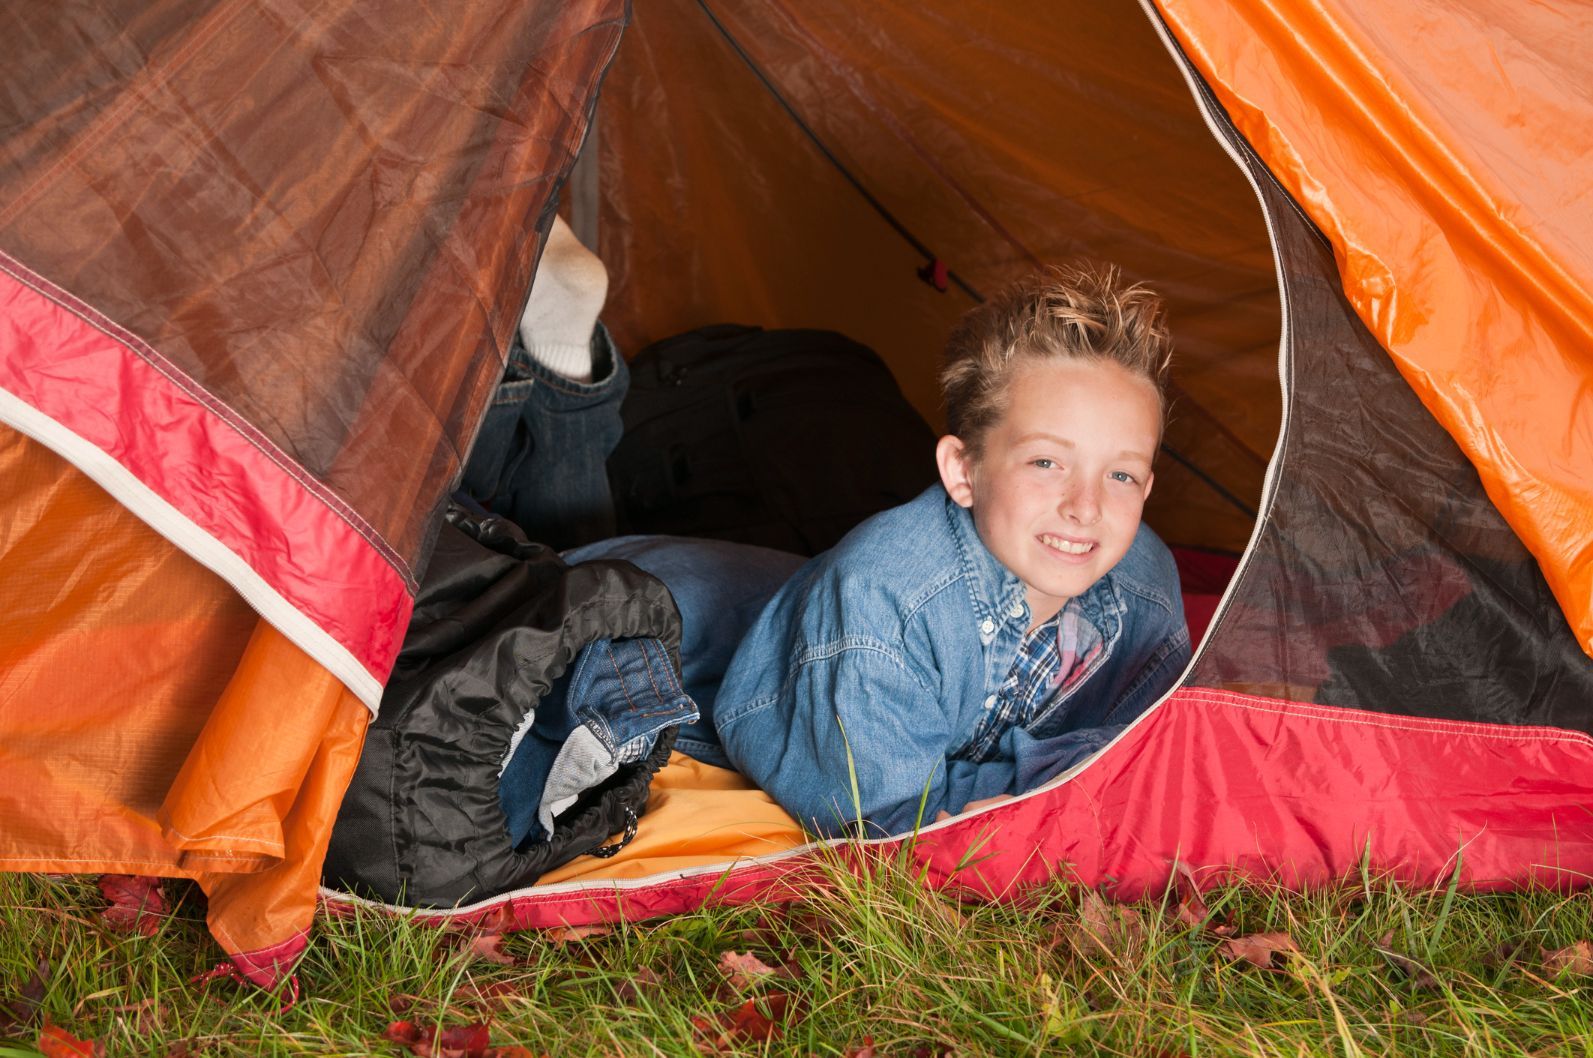 A child in a red tent, camping with family.